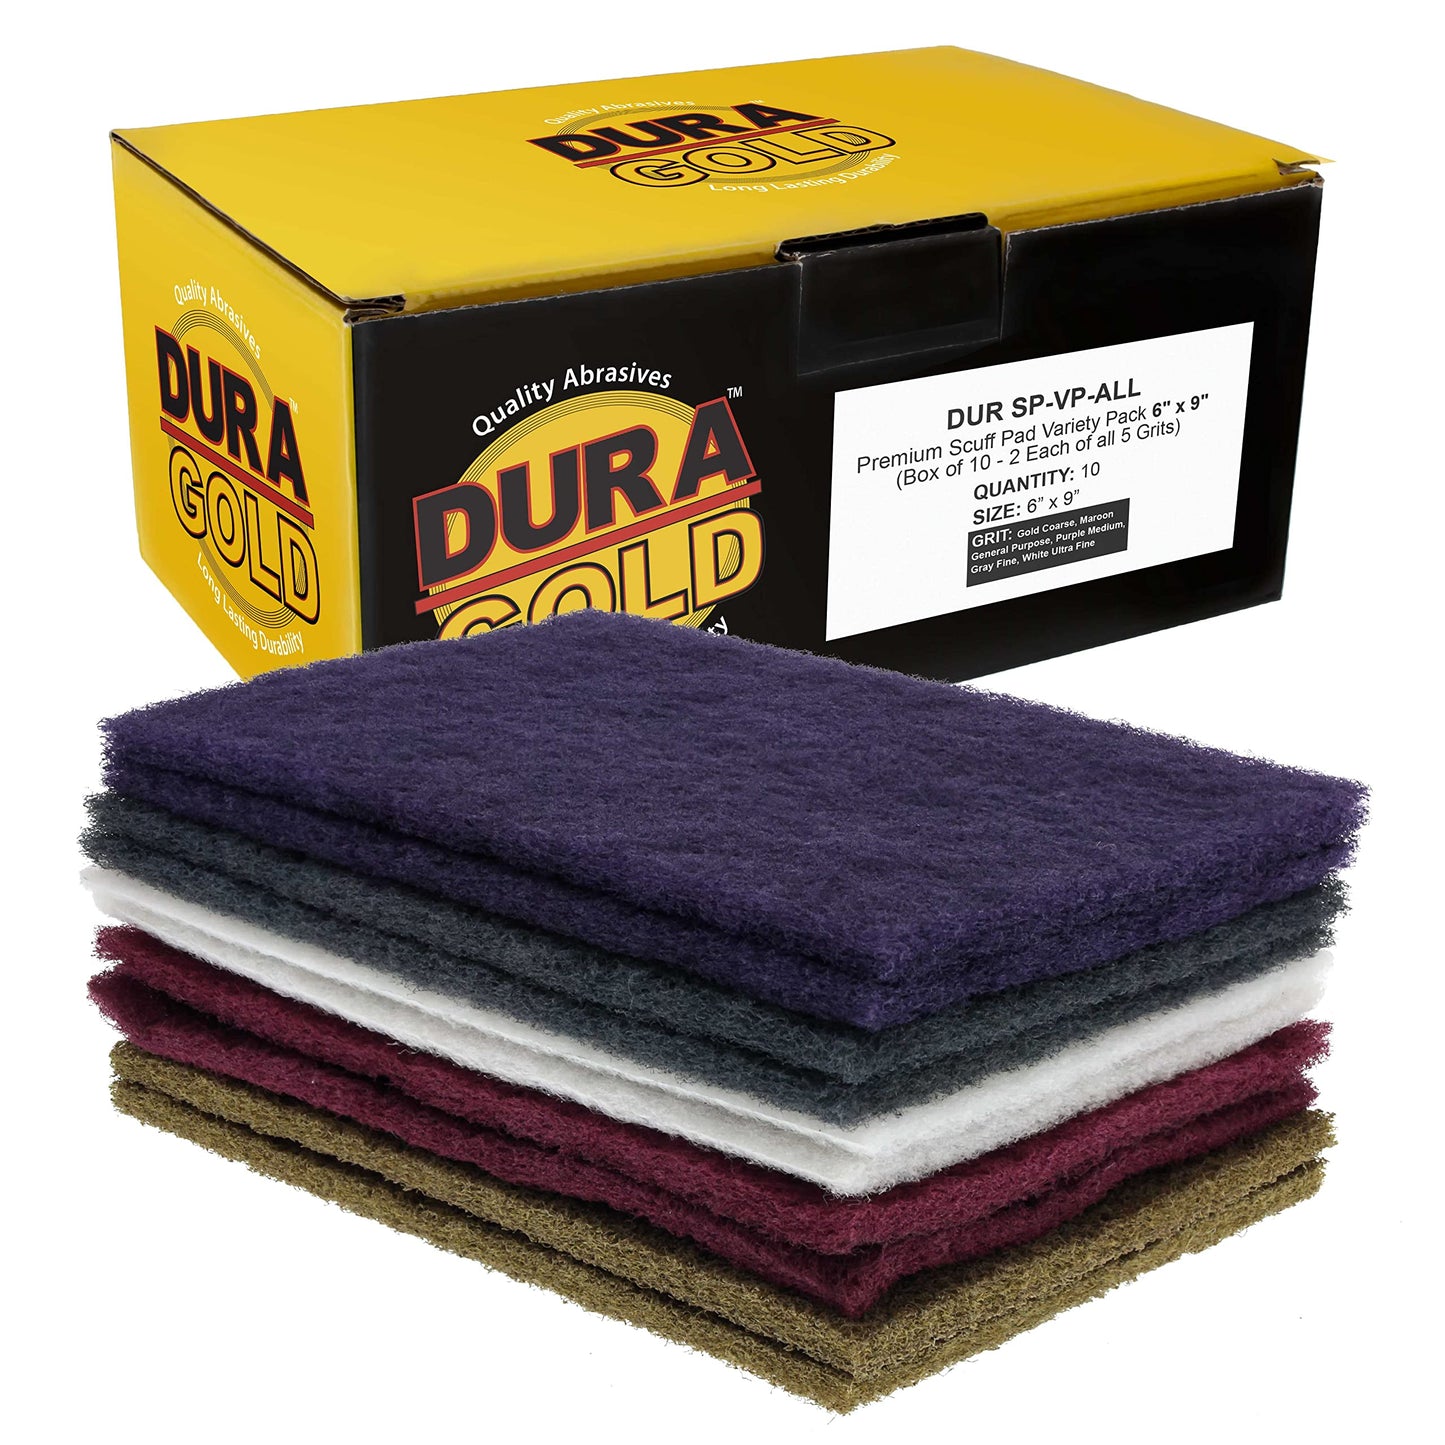 Dura-Gold Premium 6" x 9" 10 Scuff Pad Variety Pack, 2 Each Maroon, Gray, Gold, Purple and White - Scuffing, Scouring, Sanding, Cleaning, Blending,